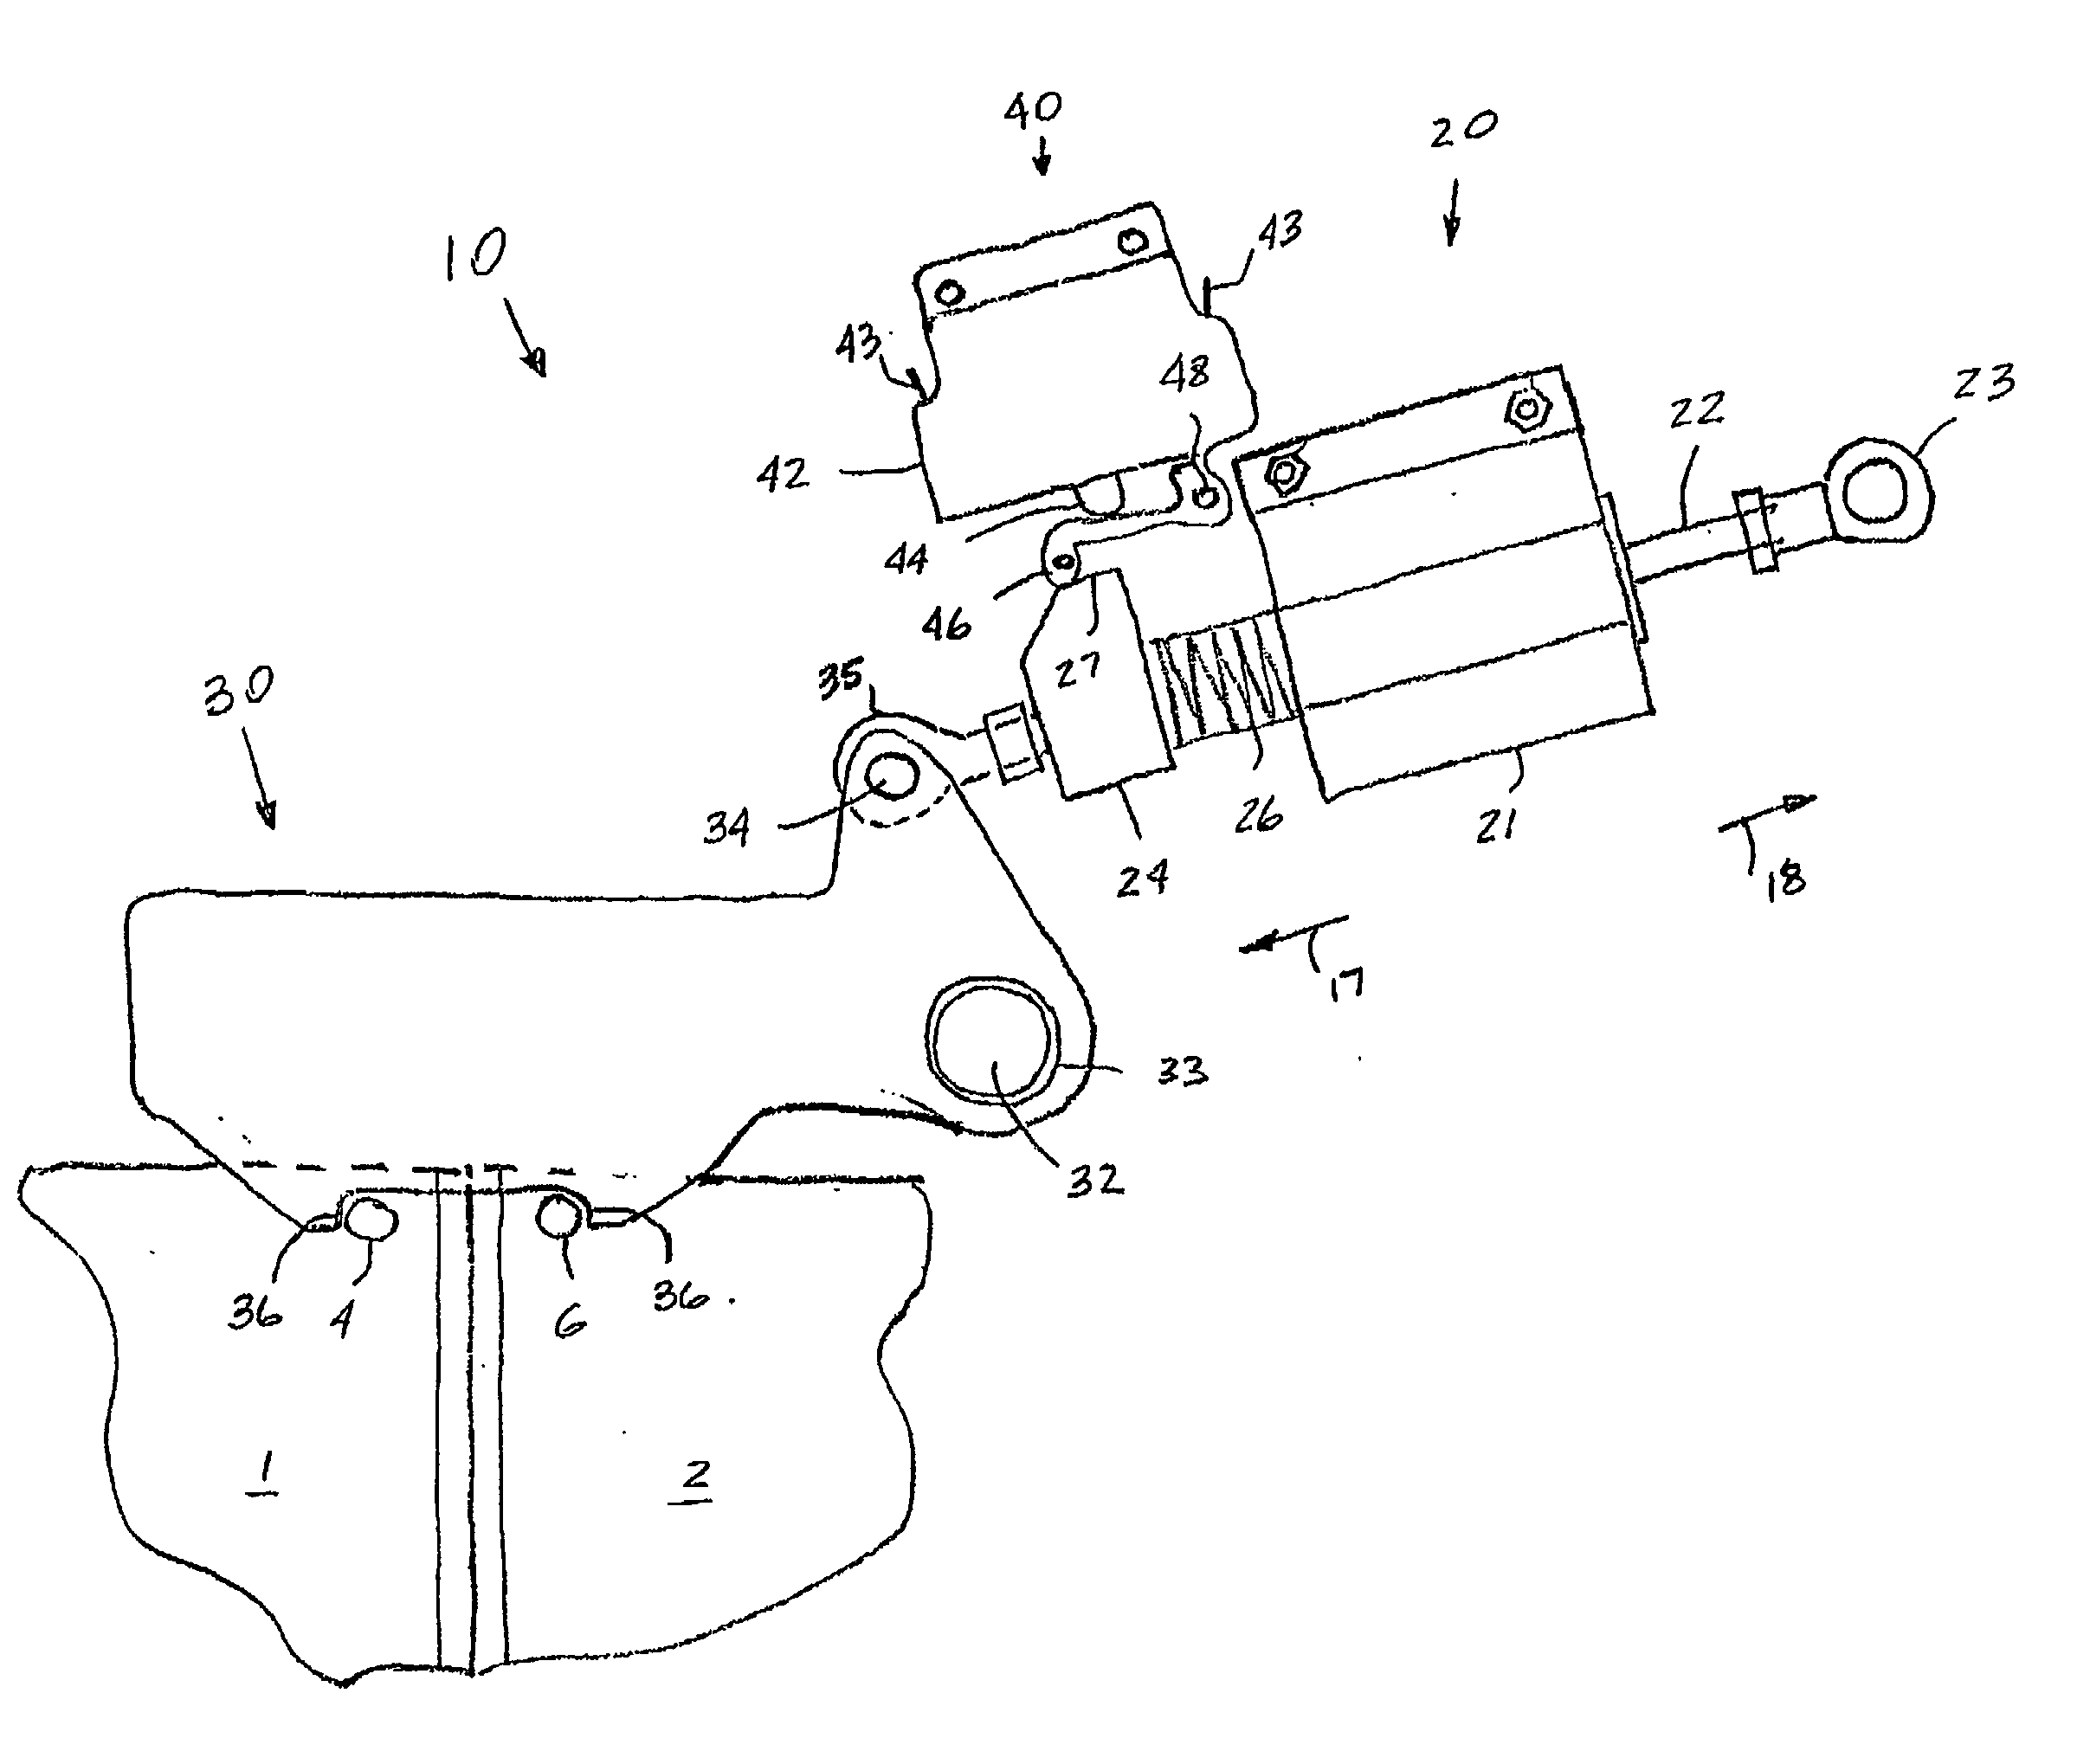 Linearly actuated locking device for transit vehicle door system